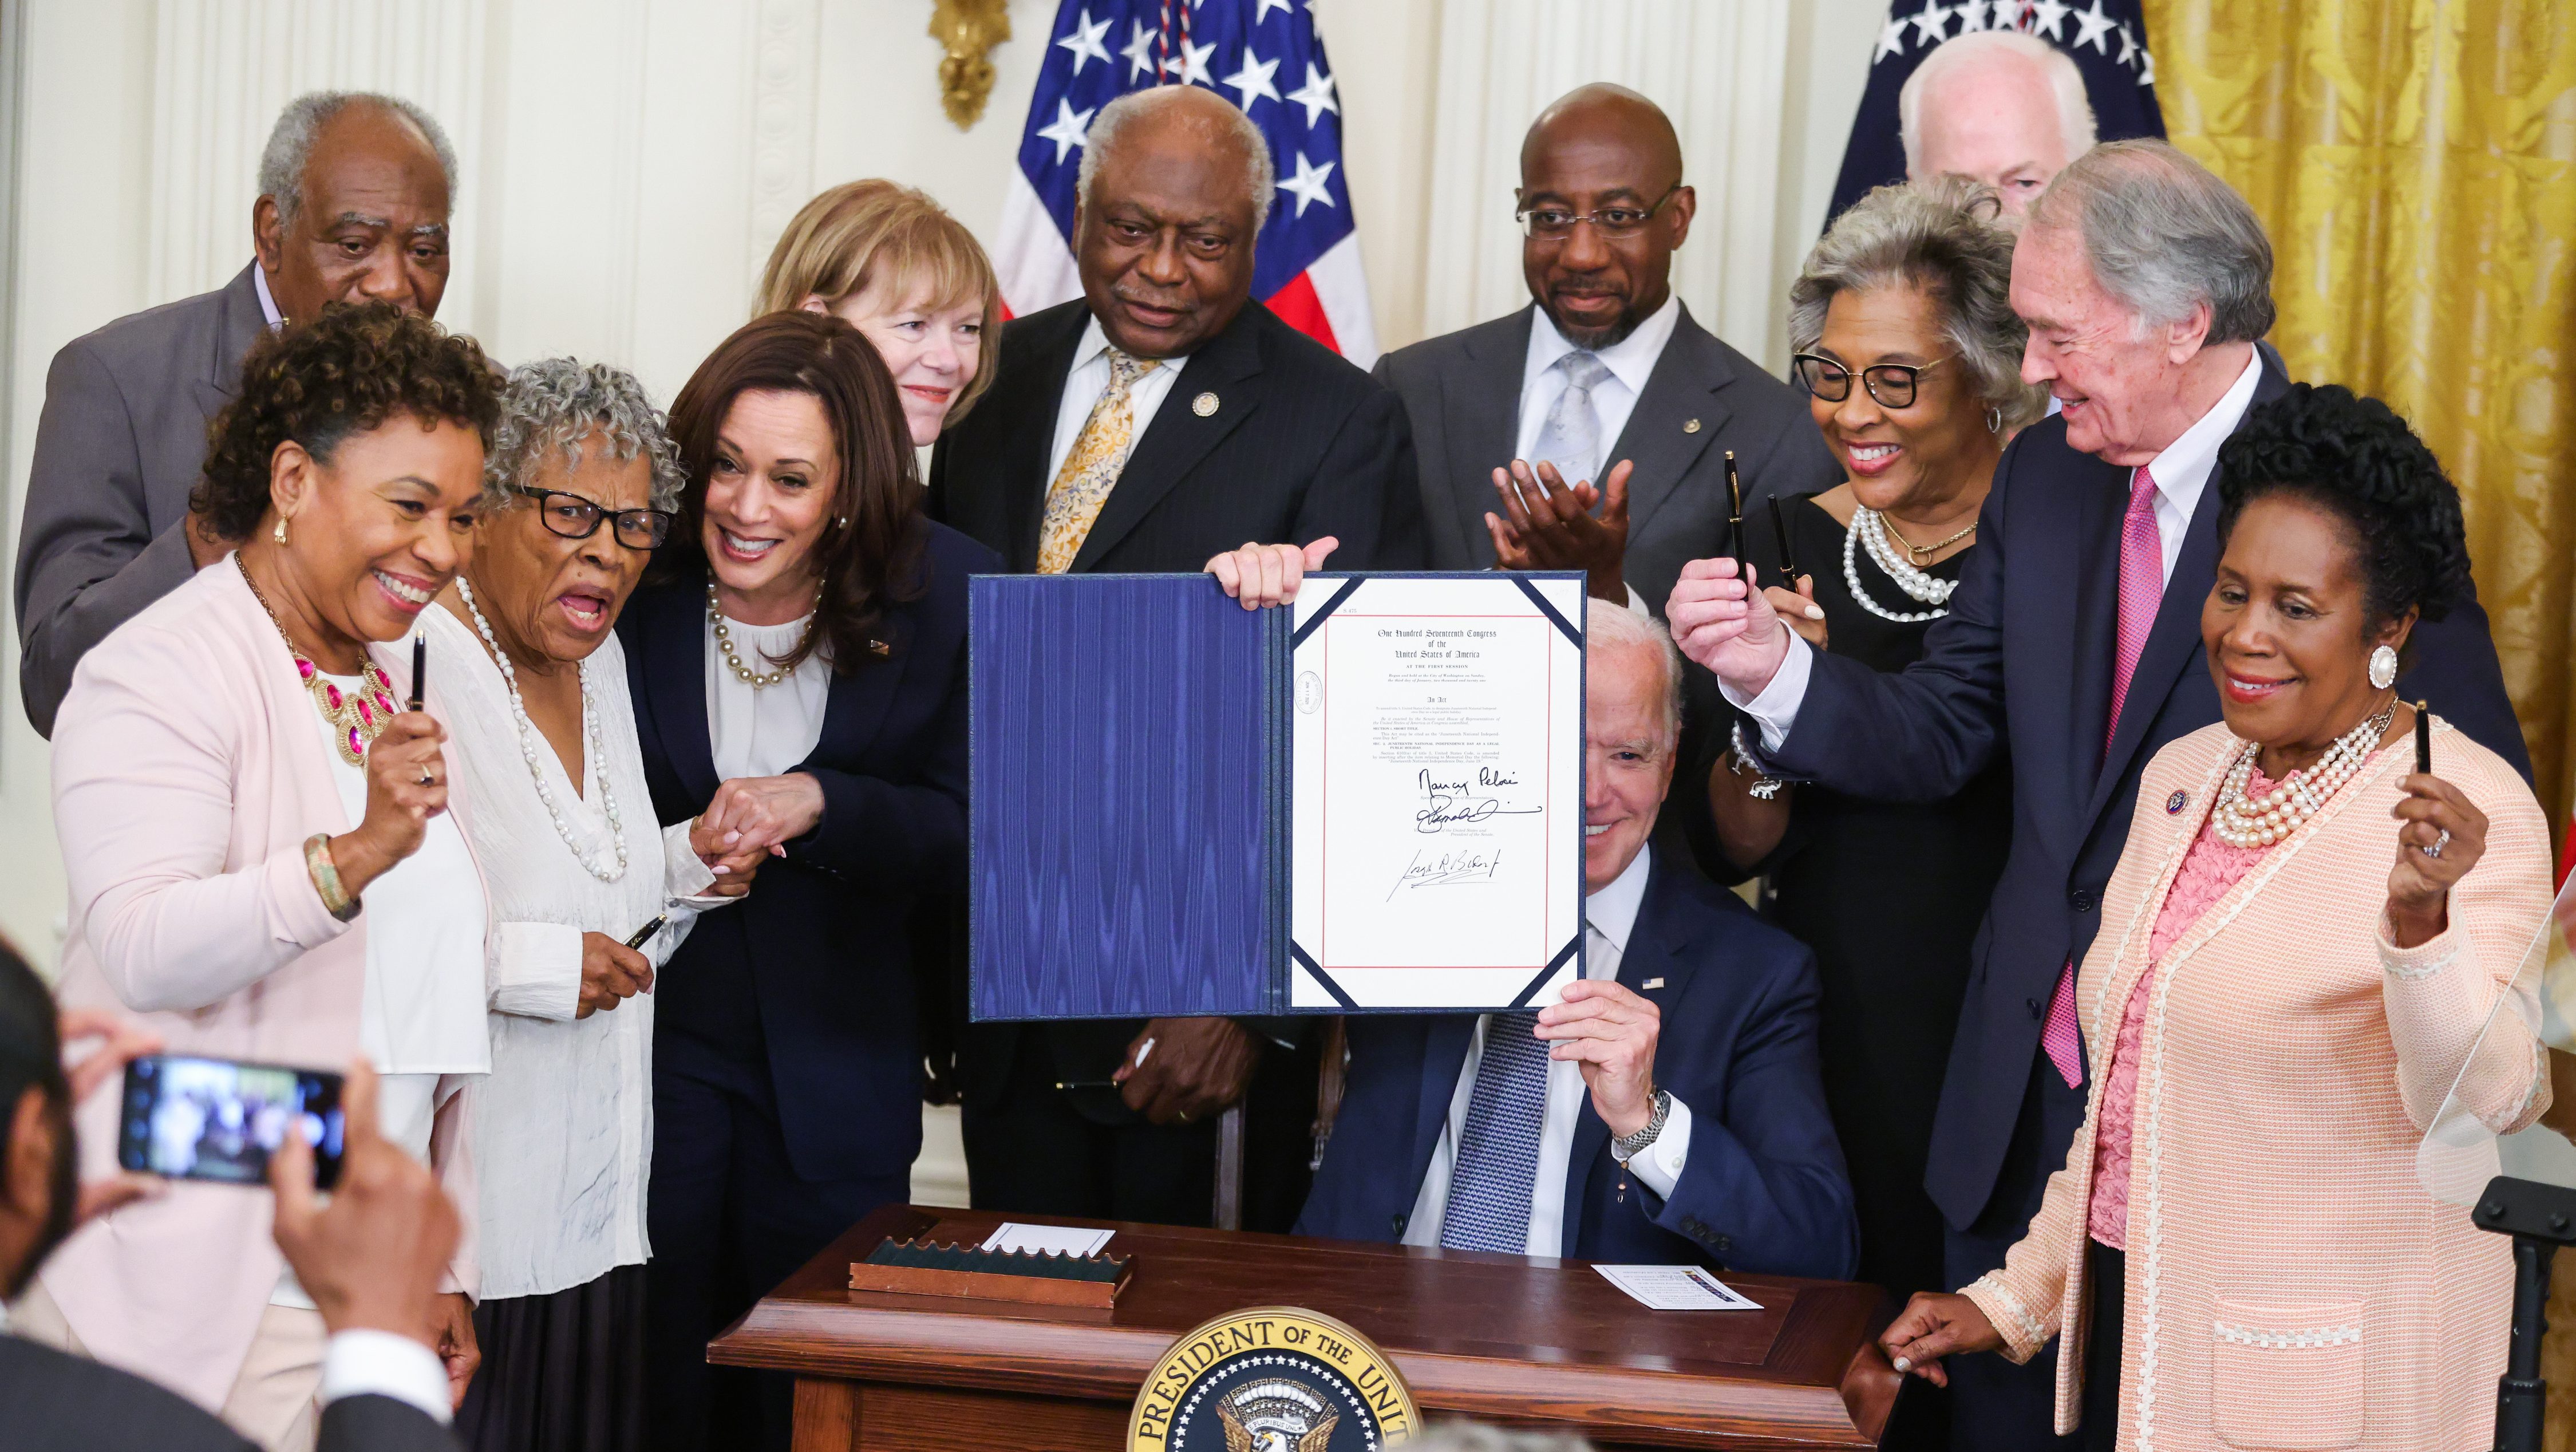 President Joe Biden holds up a signed Juneteenth National Independence Day Act during a ceremony in the East Room of the White House in Washington, D.C., U.S., on Thursday, June 17, 2021. Biden signed the legislation that will make June 19 a federal holiday commemorating the end of slavery in the United States after the House and Senate passed the bill in votes earlier this week.